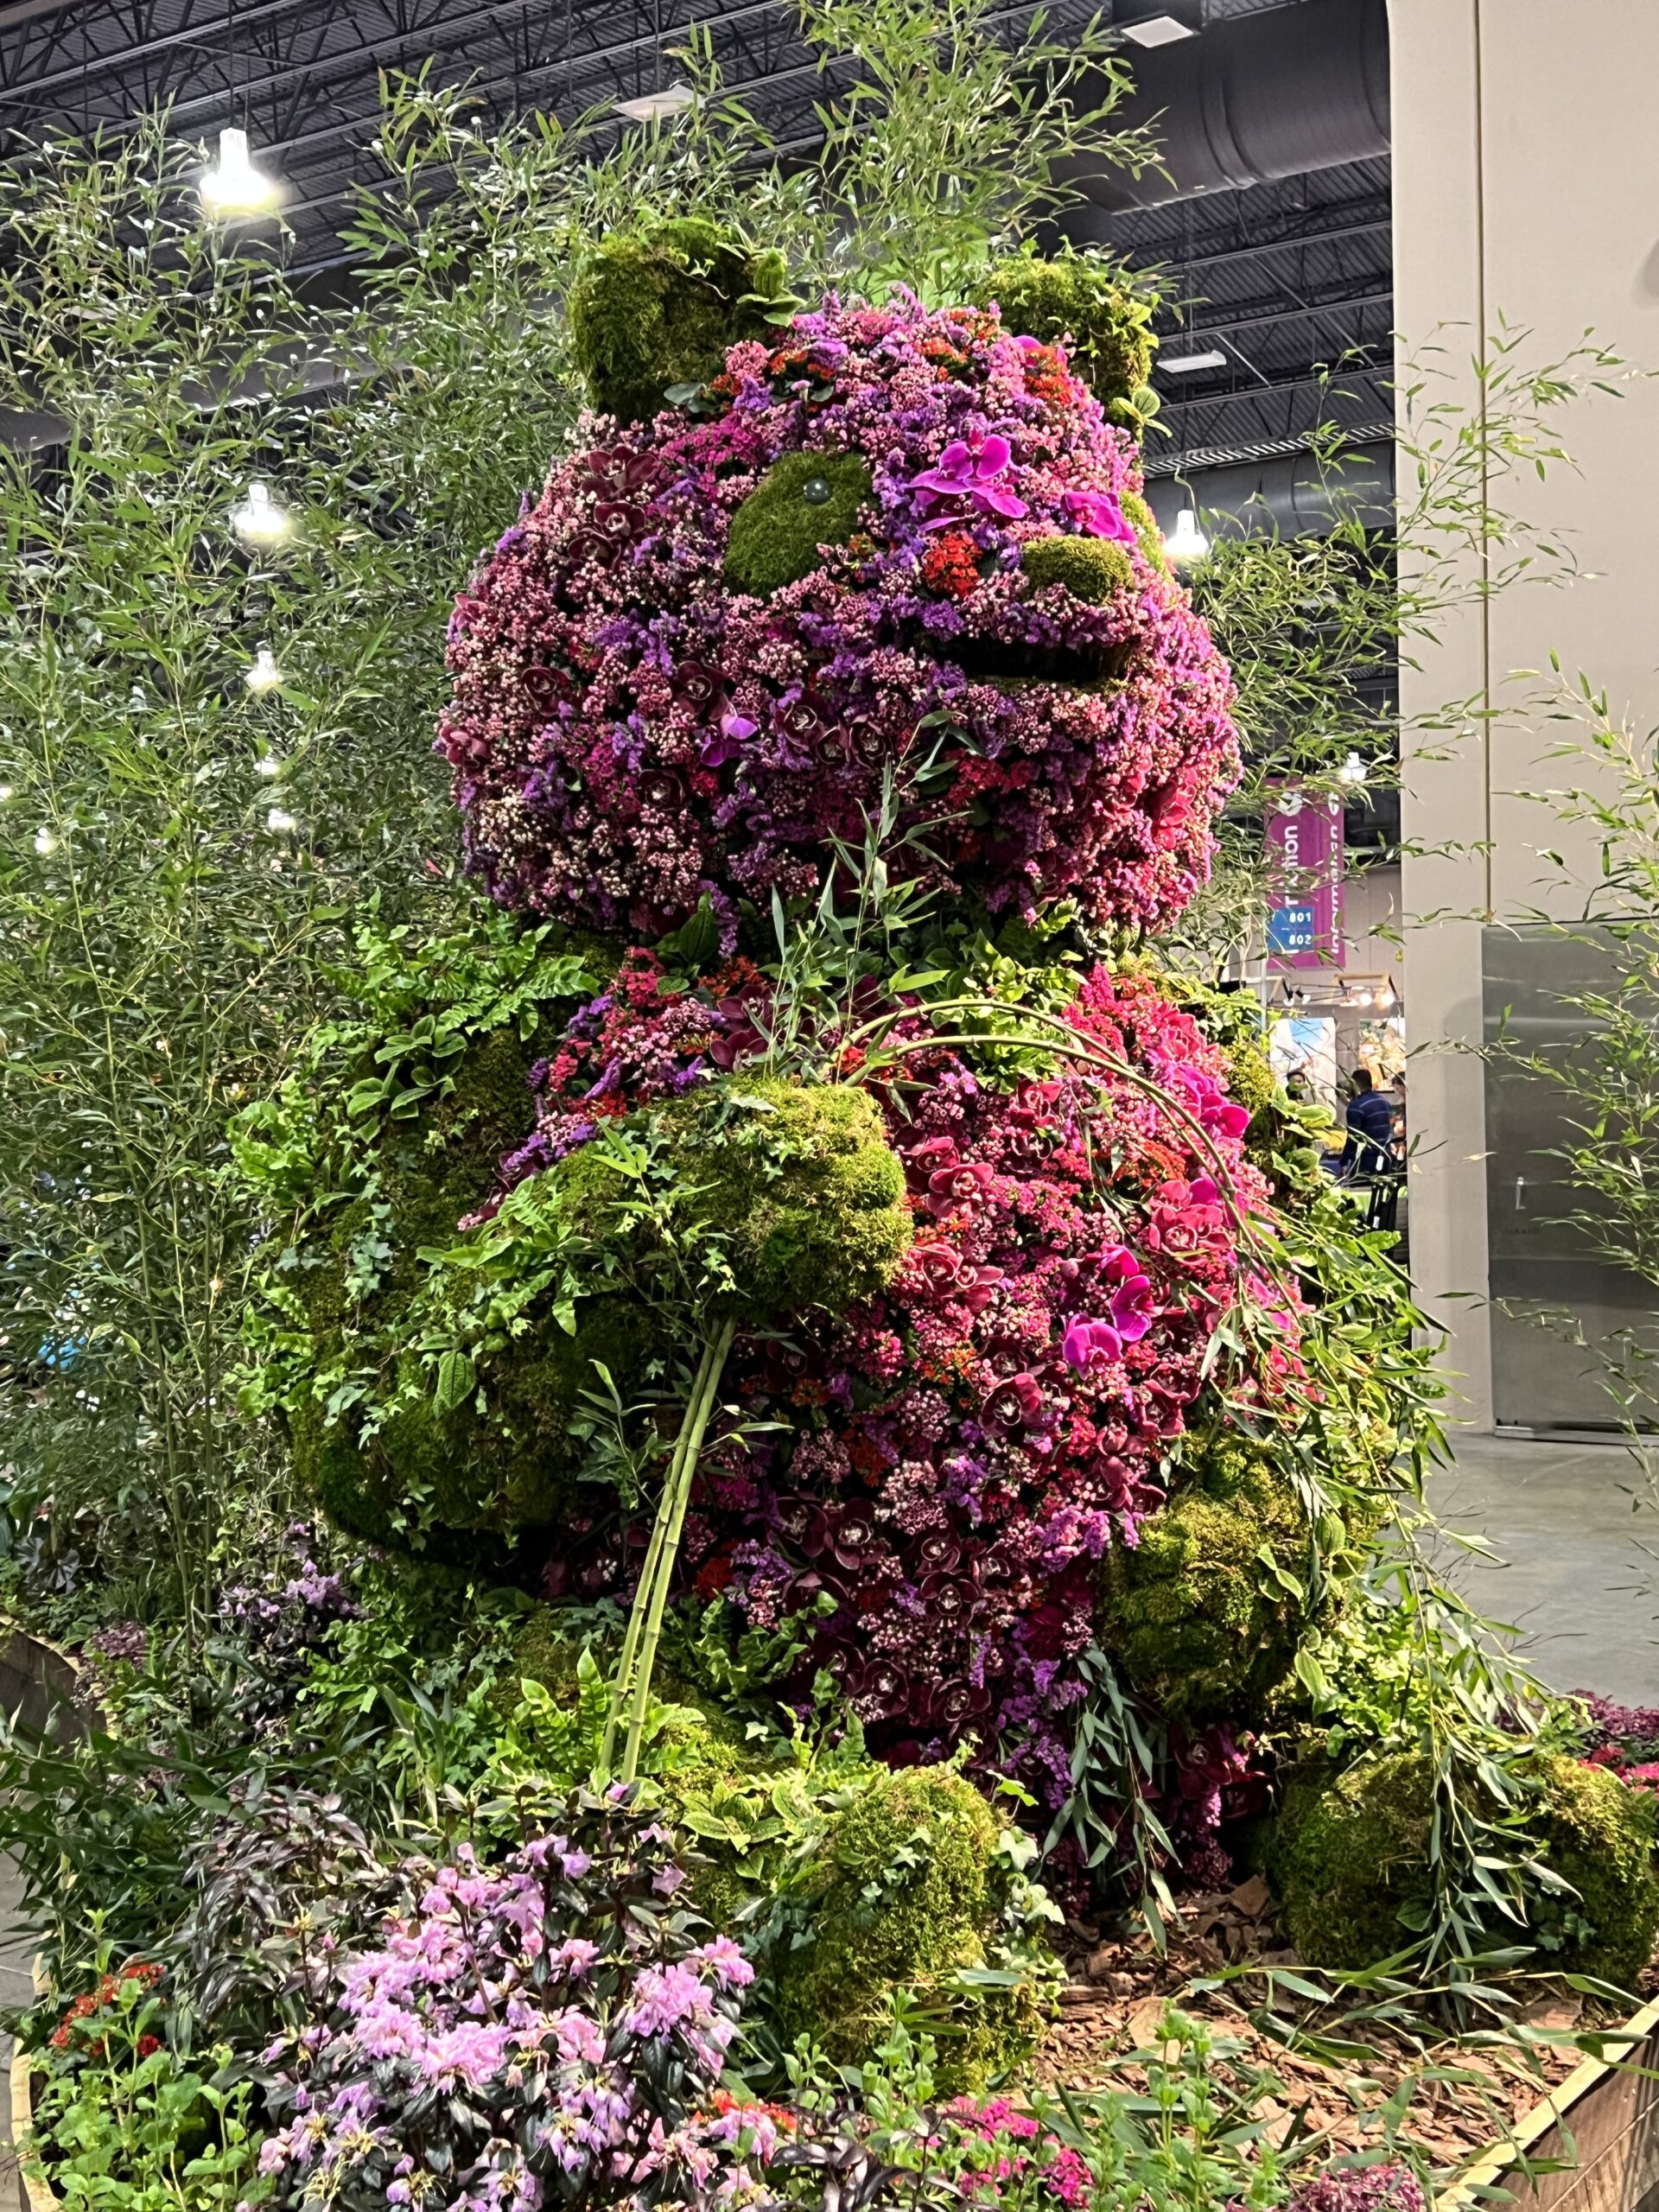 Panda made out of flowers at the Philadelphia Flower Show